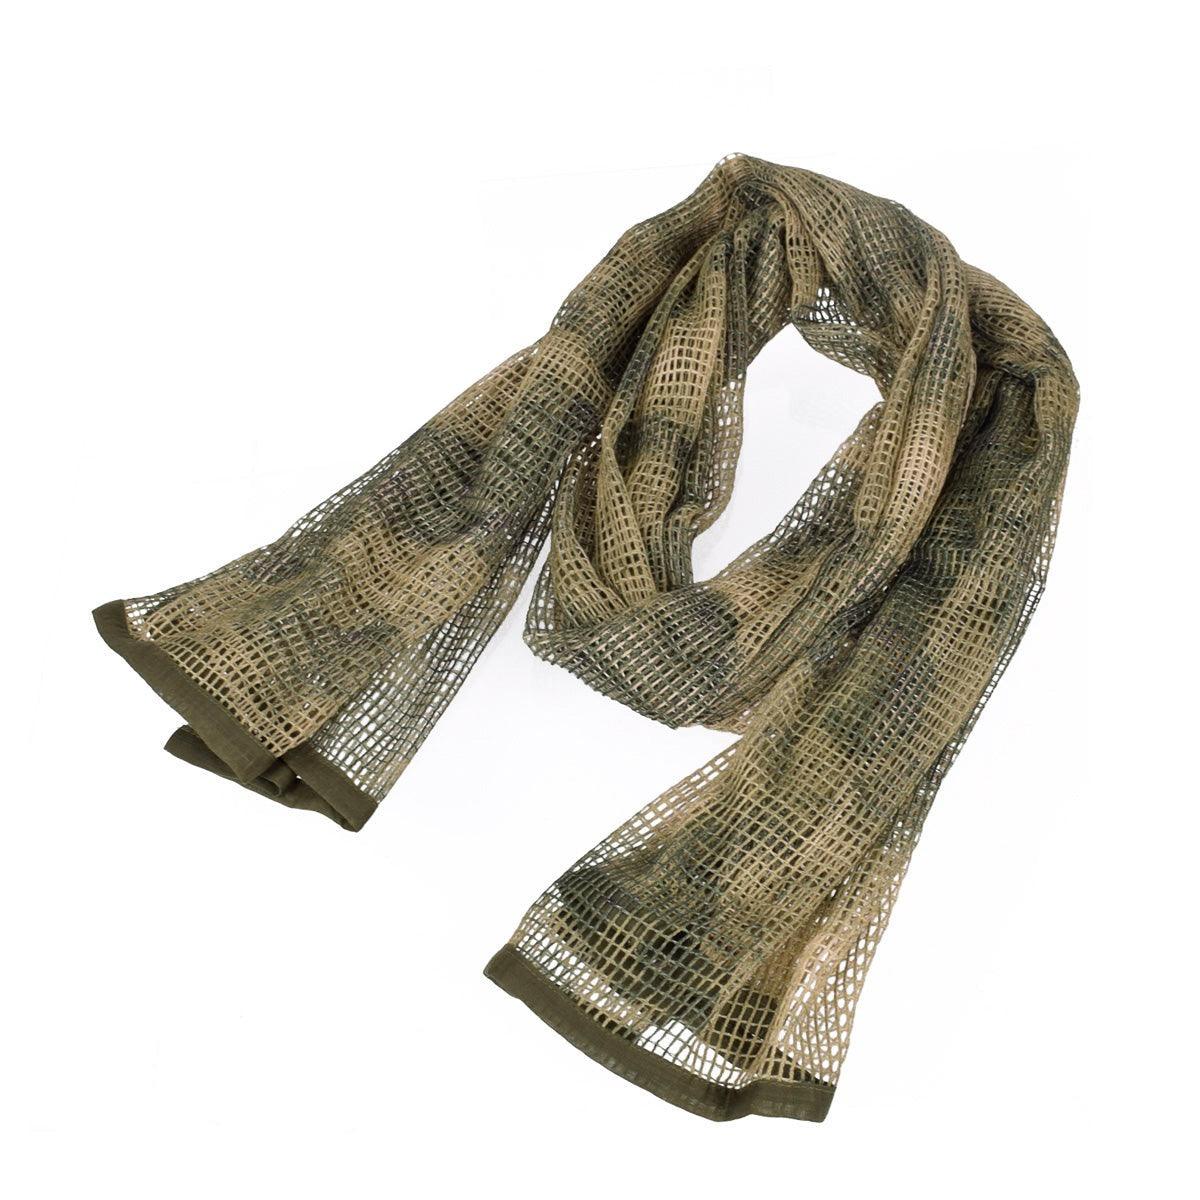 Foulard Militaire Camouflage